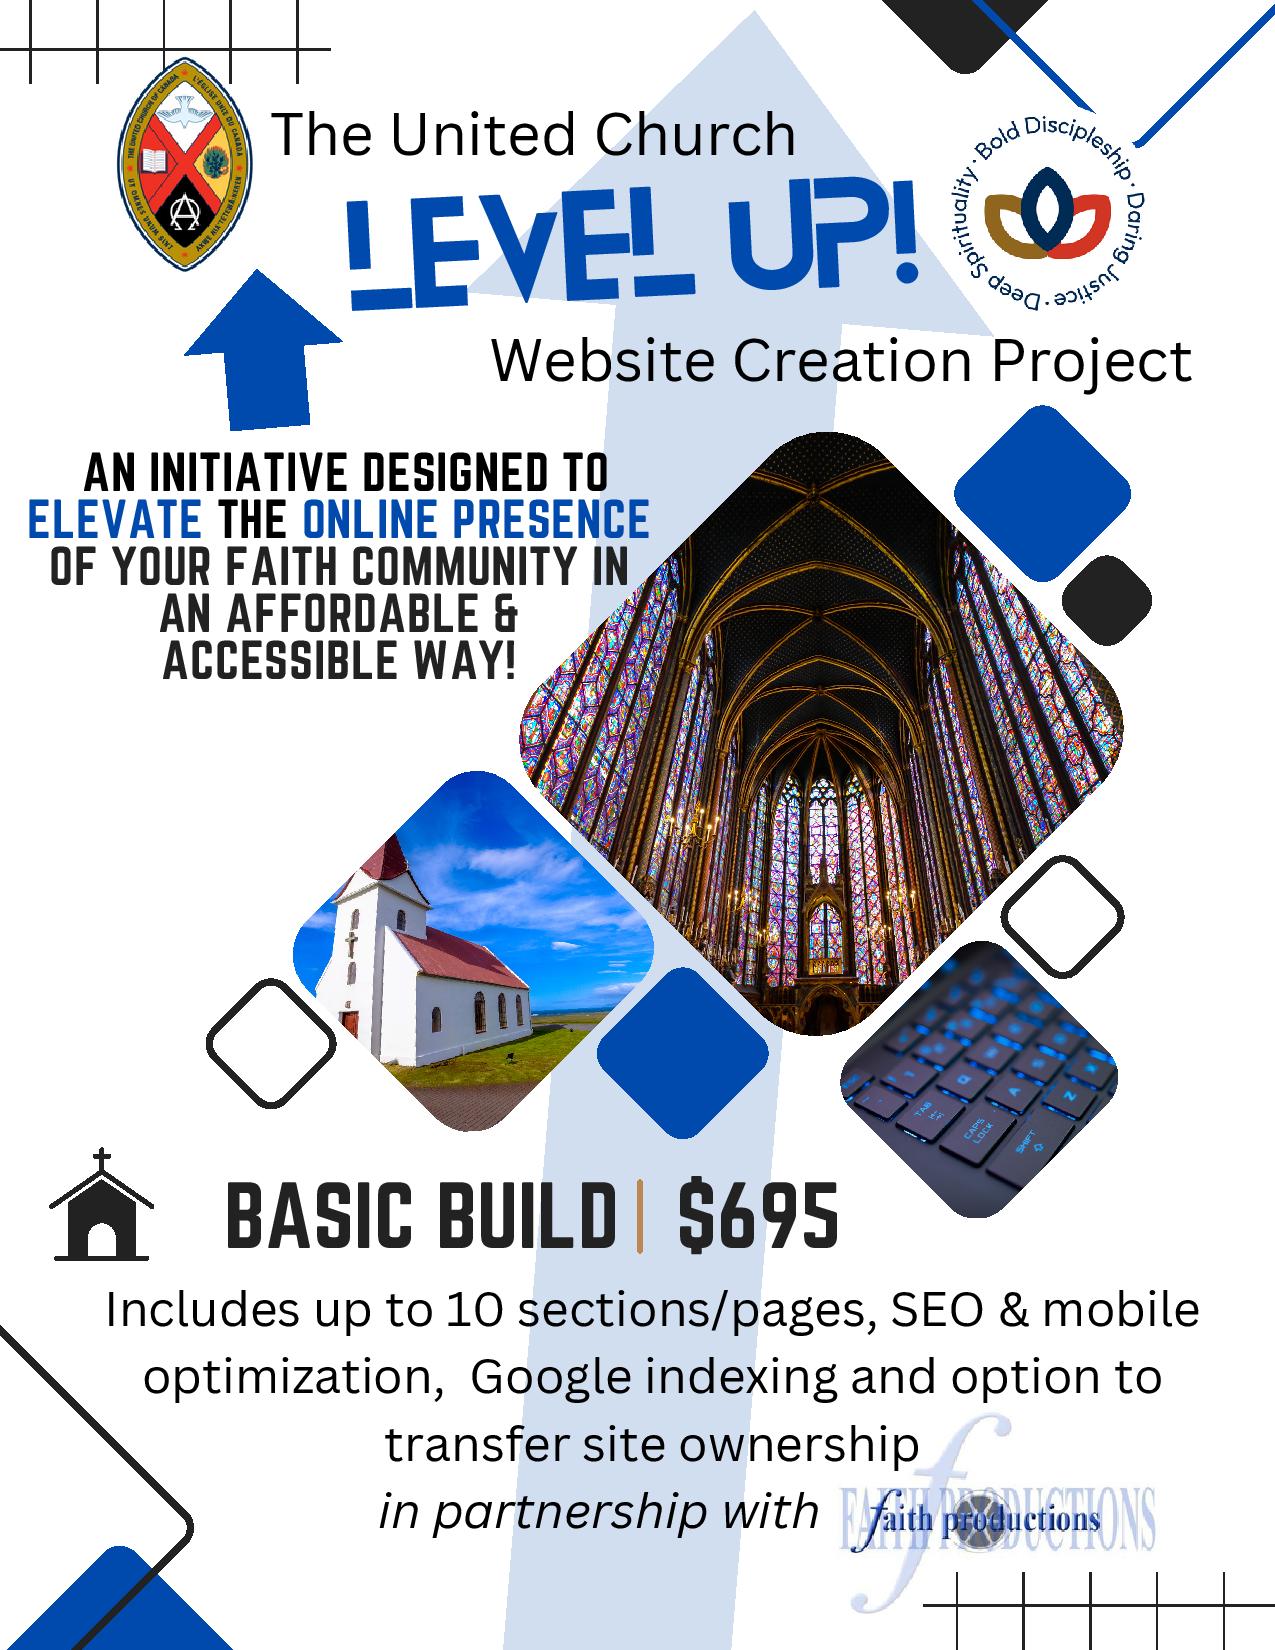 Level Up website design: basic build 695 dollars, with an image of a cathedral and another of a rural church. 